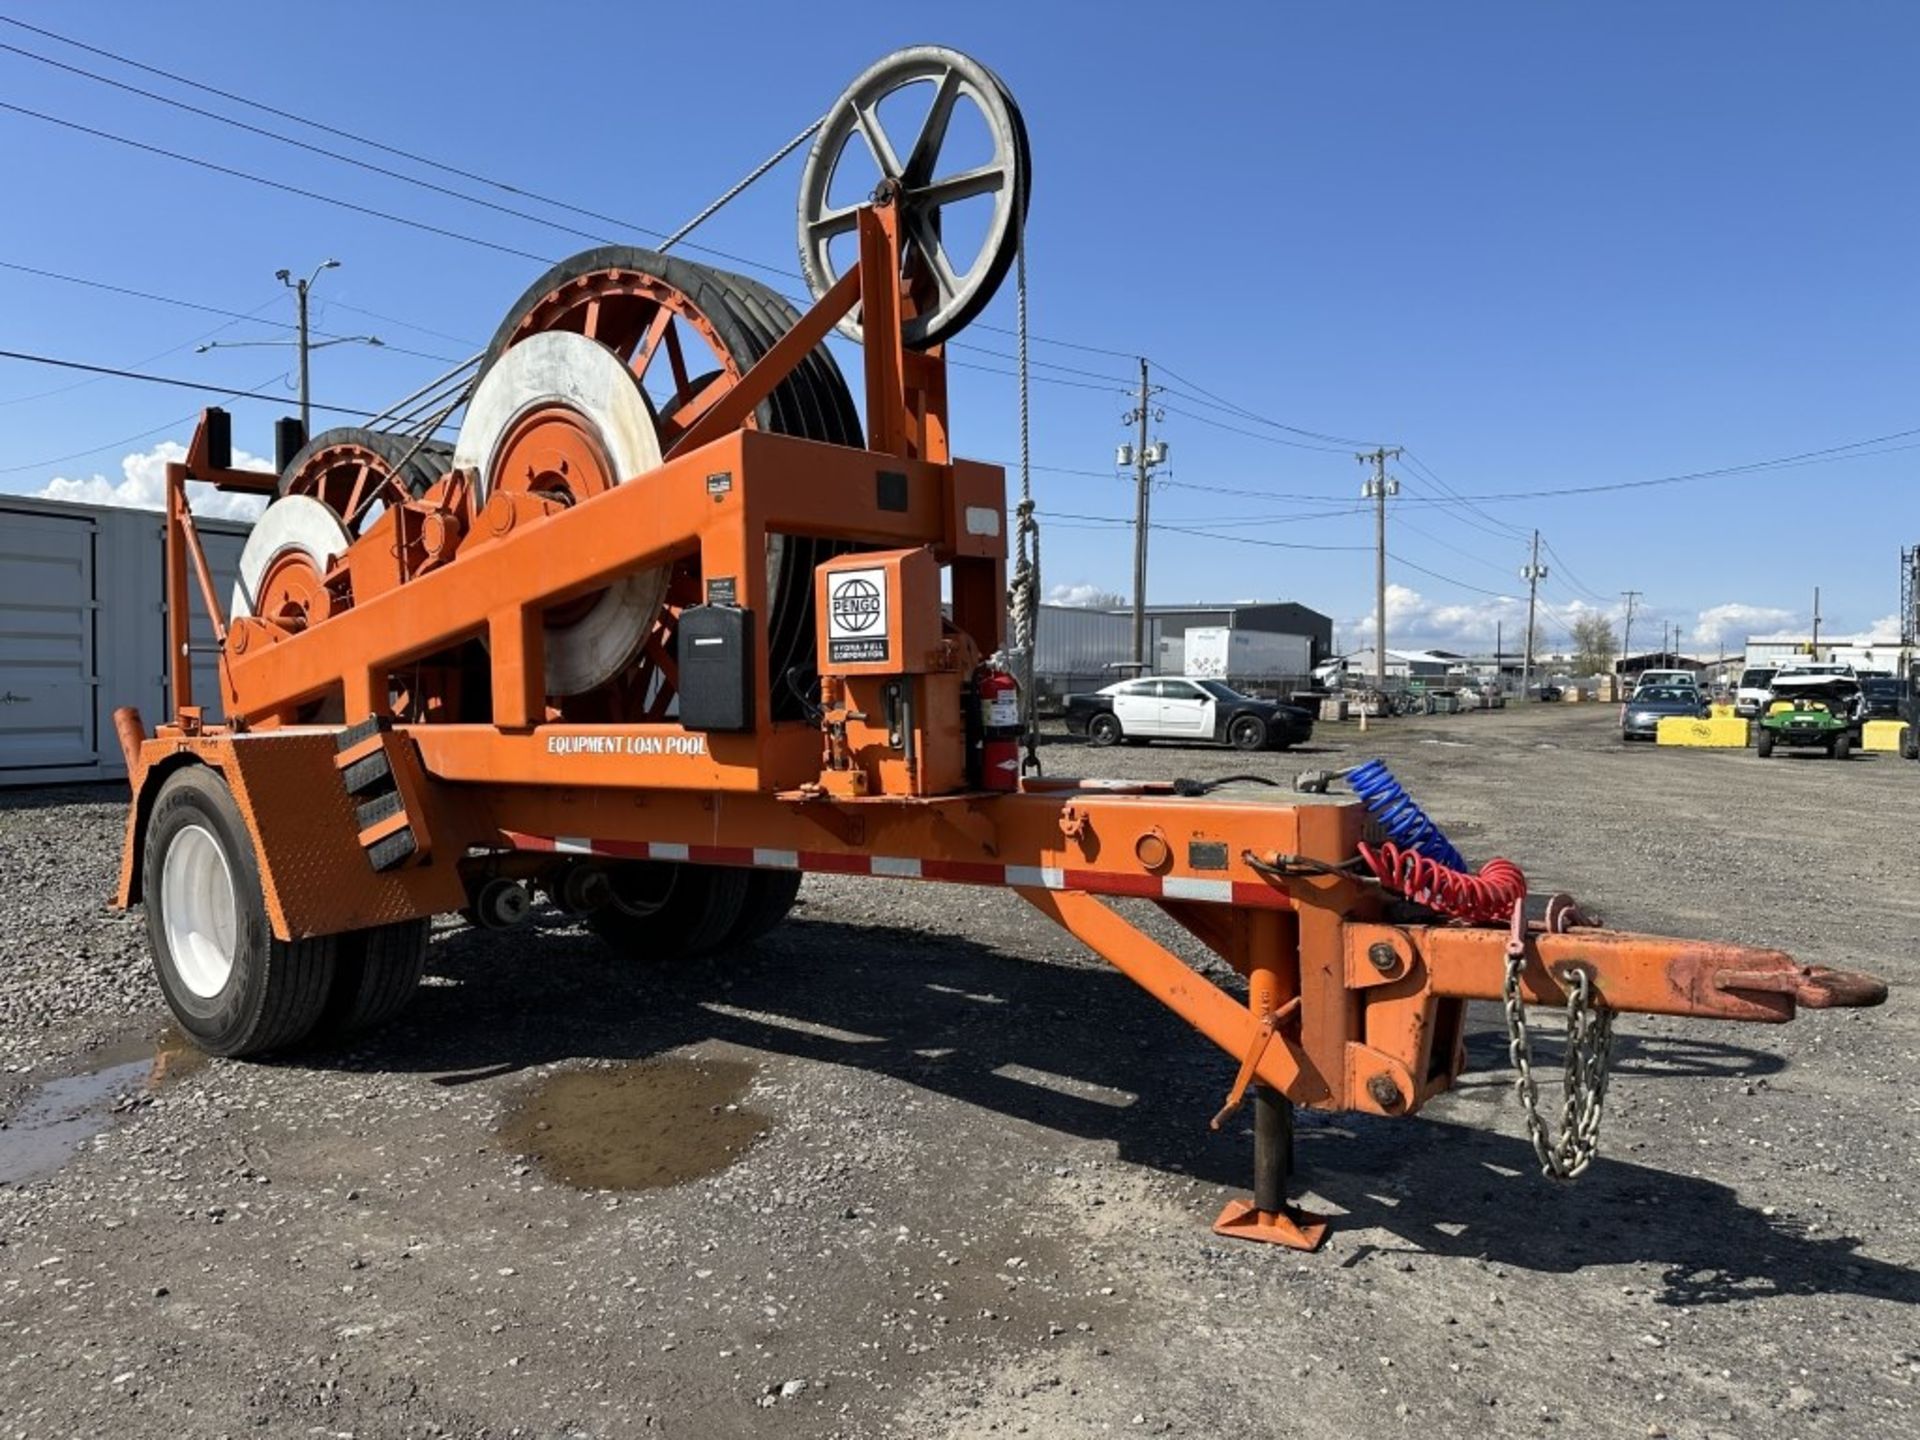 1970 Pengo 7000 TPI Towable Cable Puller - Image 2 of 28